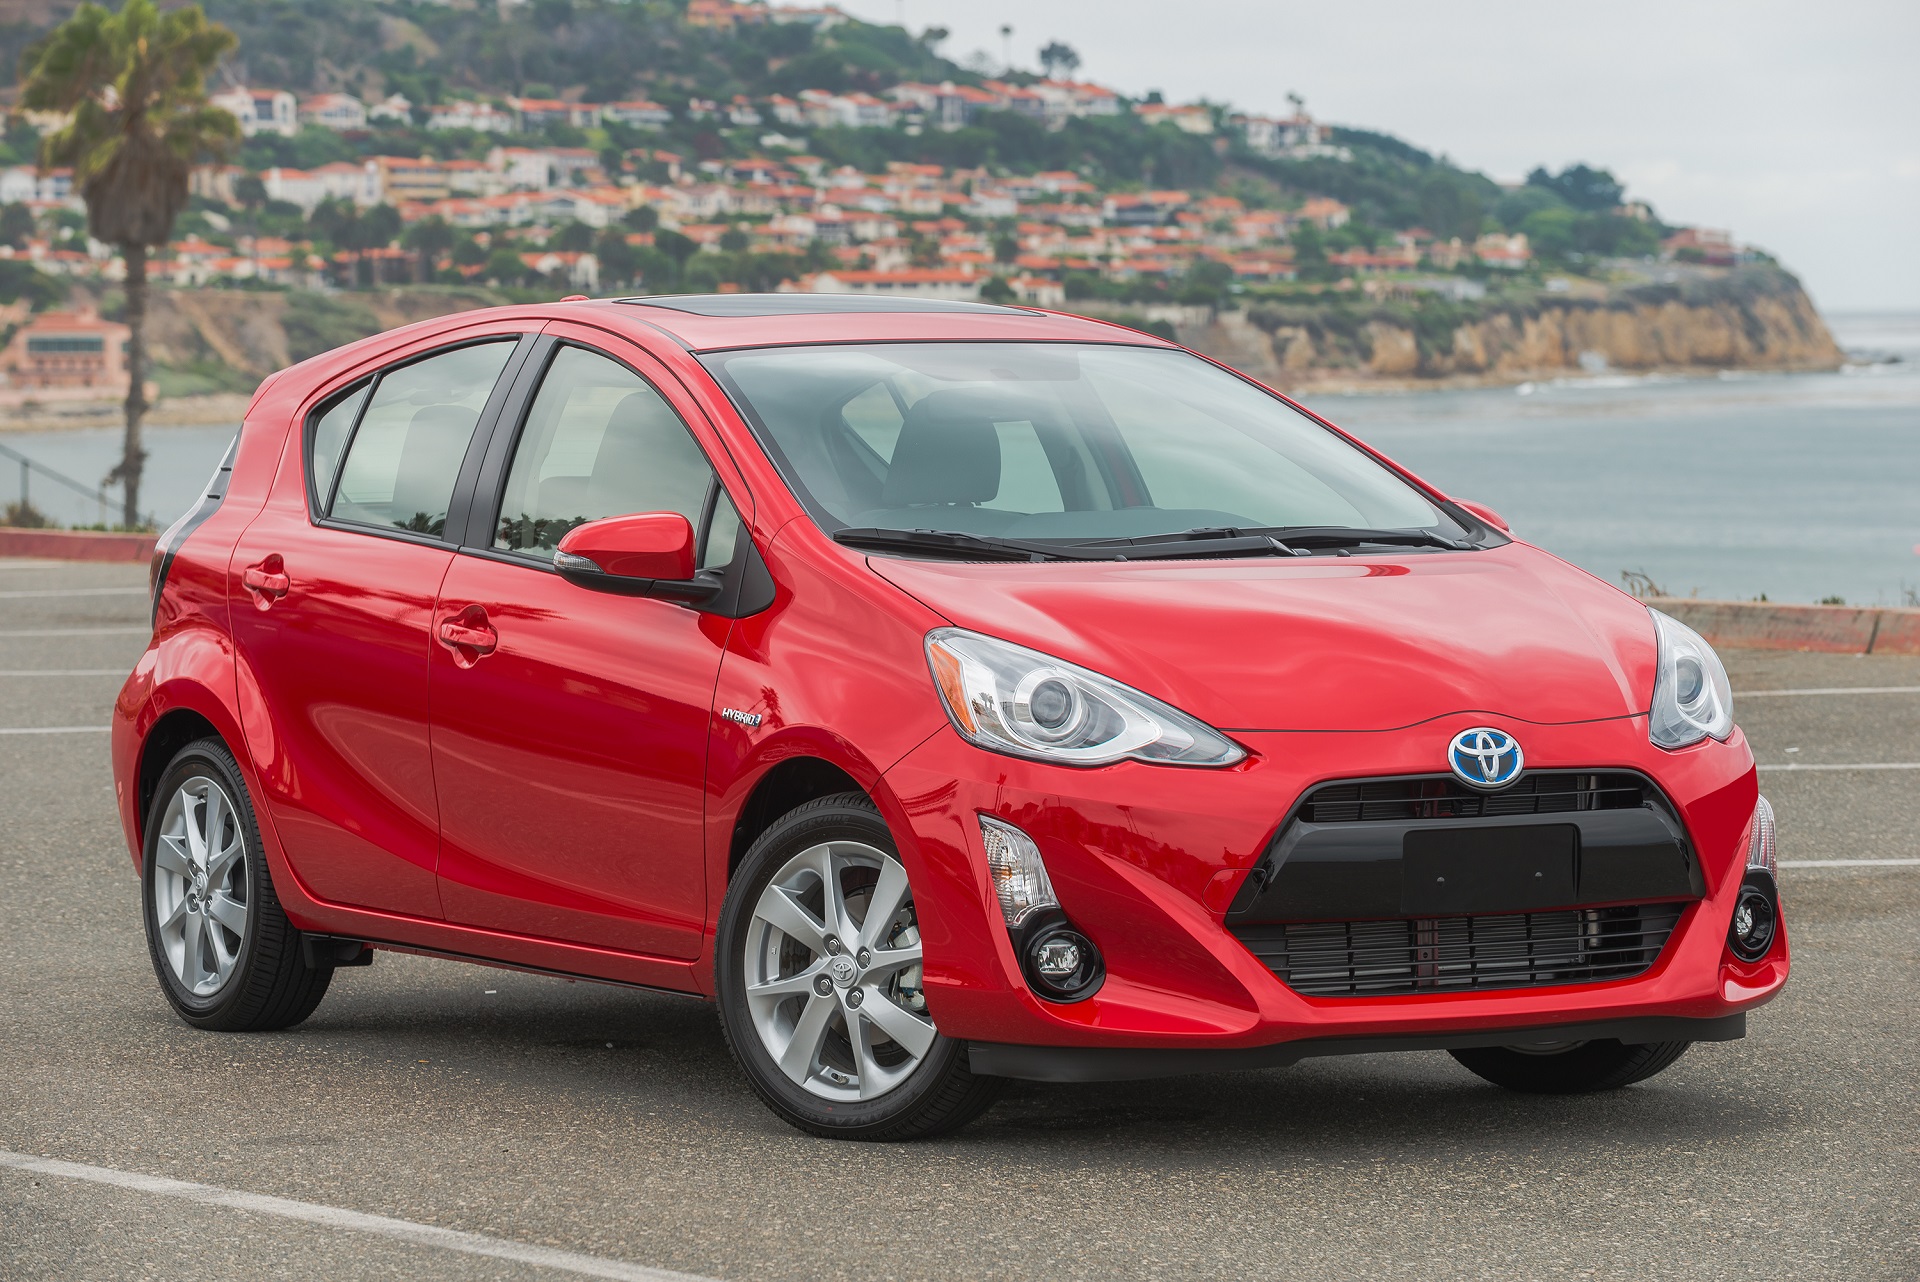 2018 Toyota Prius C Review: Prices, Specs, and Photos - The Car Connection